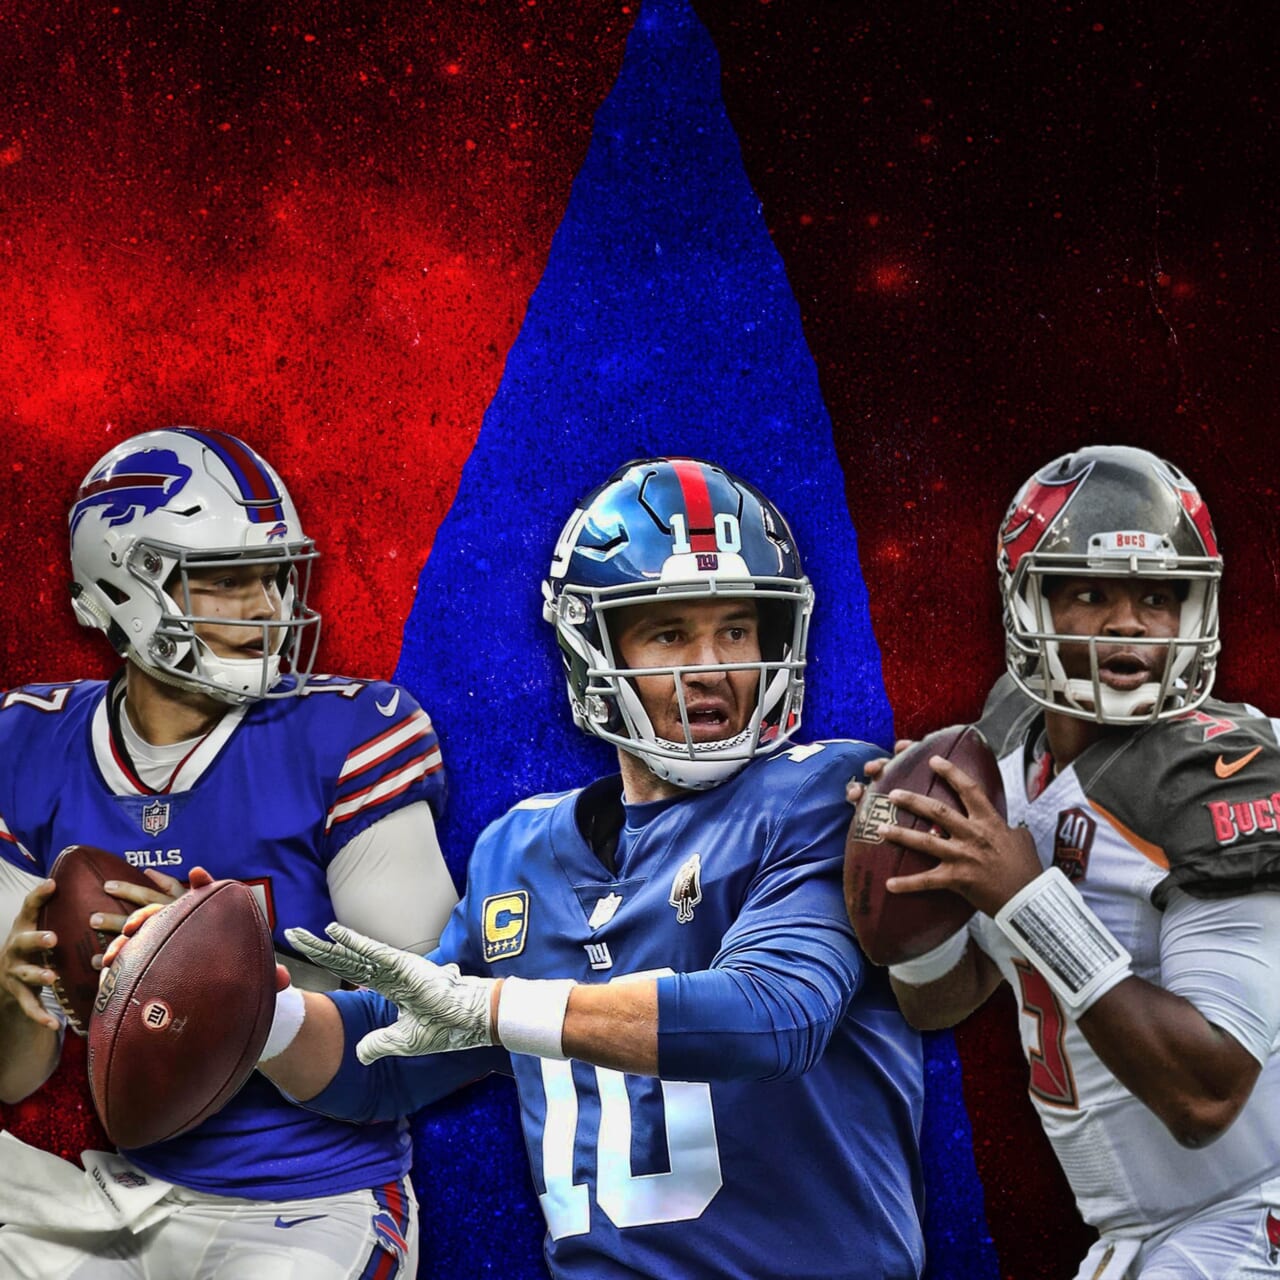 New York Giants: Two Important, Winnable Games Next On The Schedule